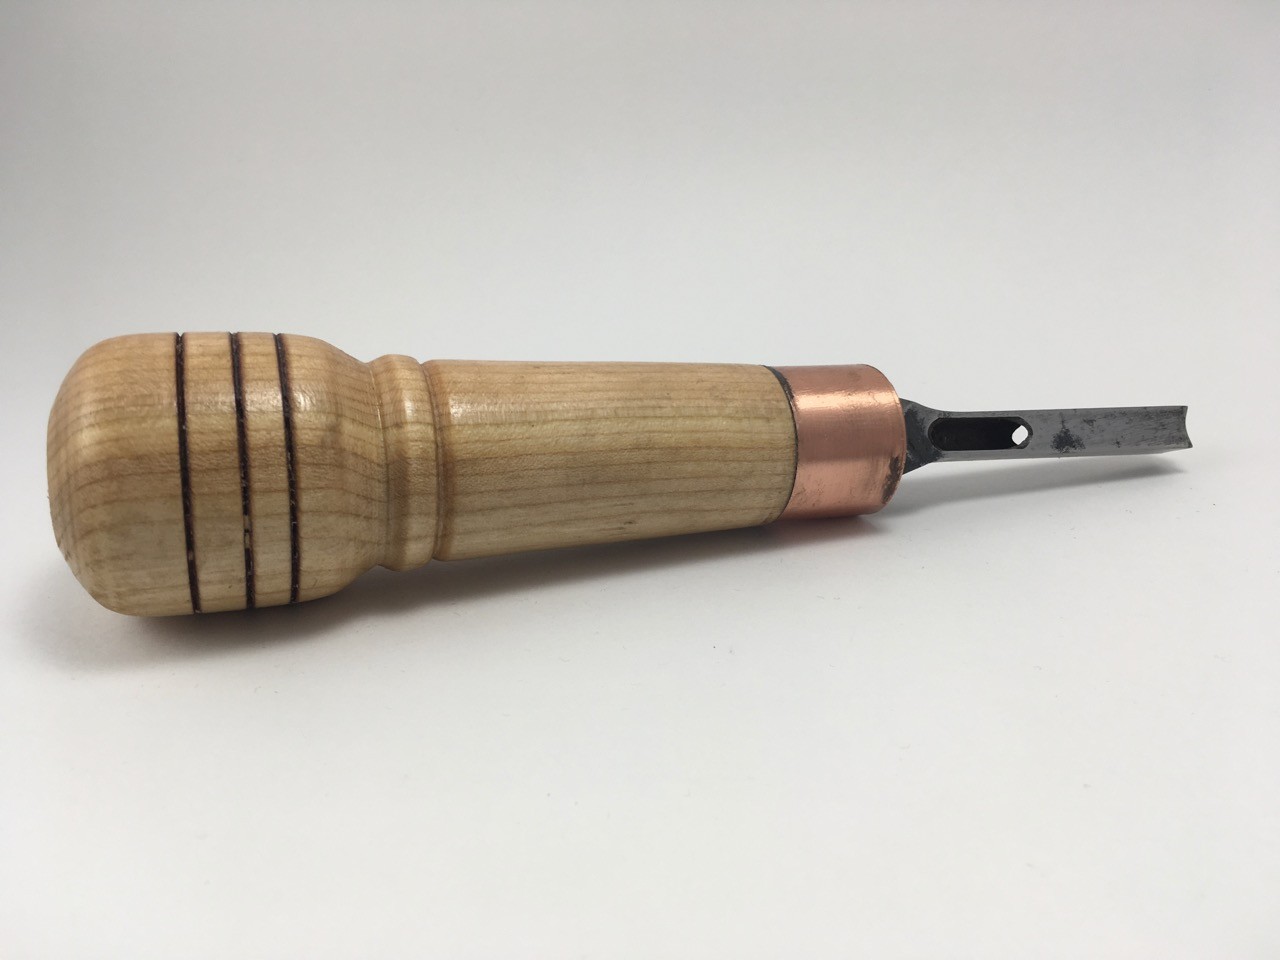 Hollow Mortise Chisel Handle